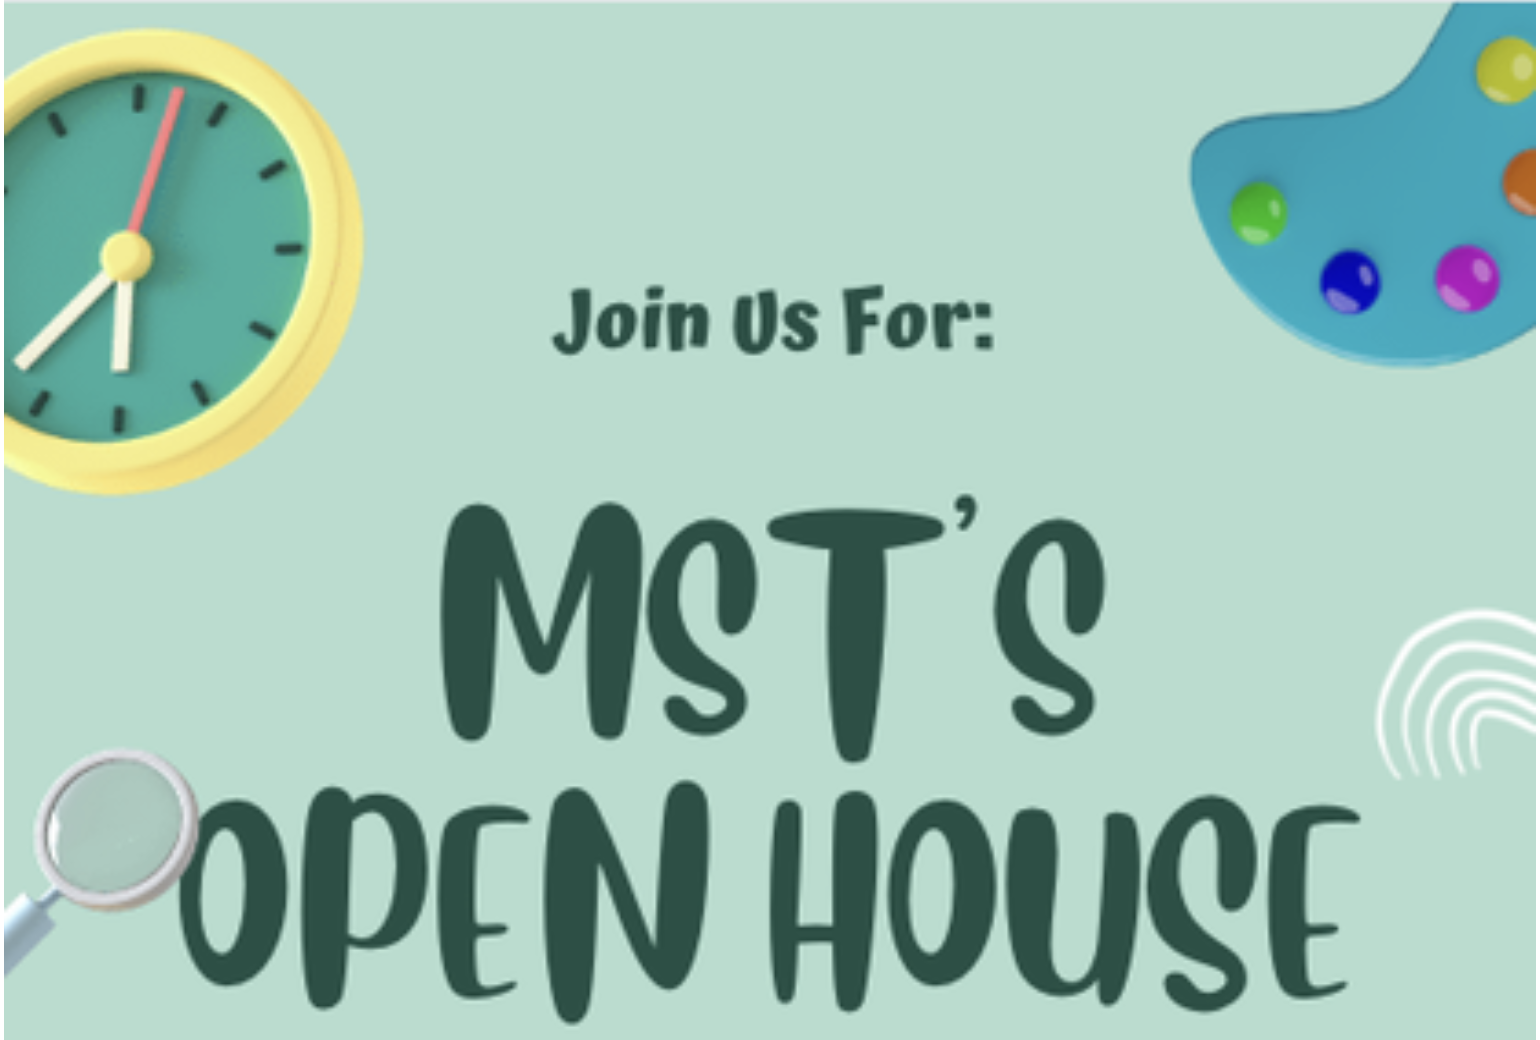 Join us for MST's Open House